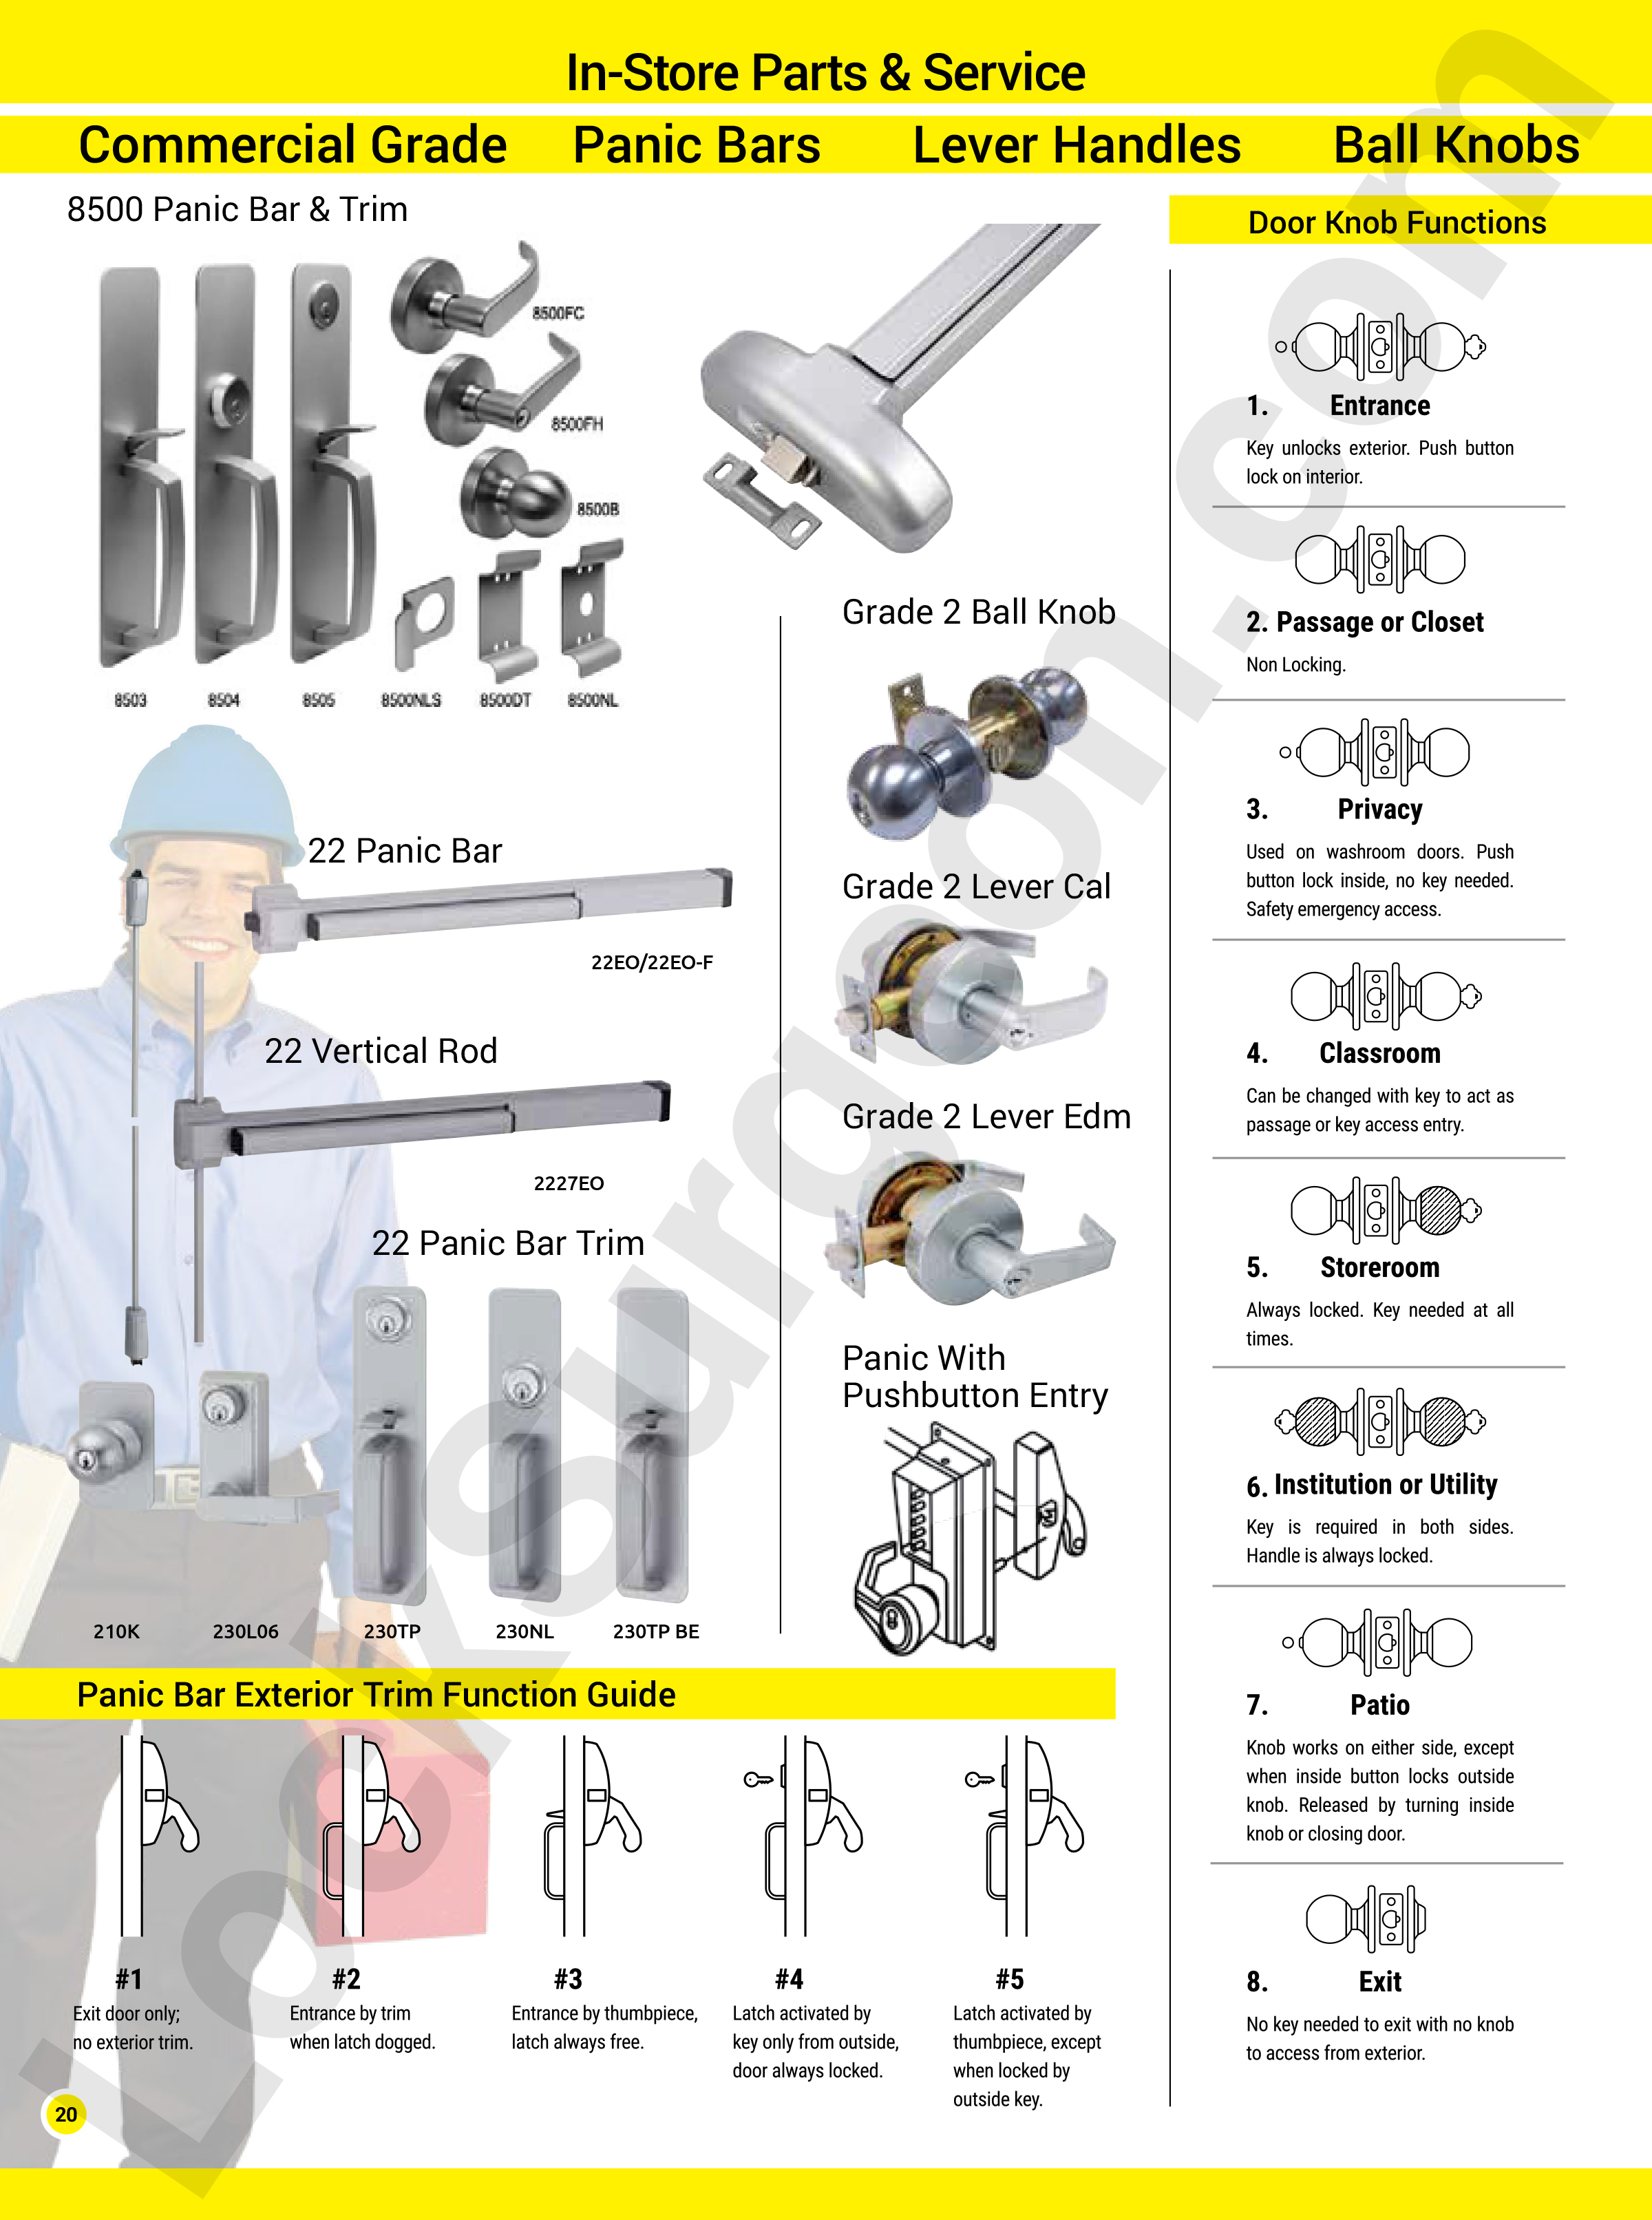 Lock Surgeon commercial grade panic bars, lever handles, ball knobs in stock for all functions.